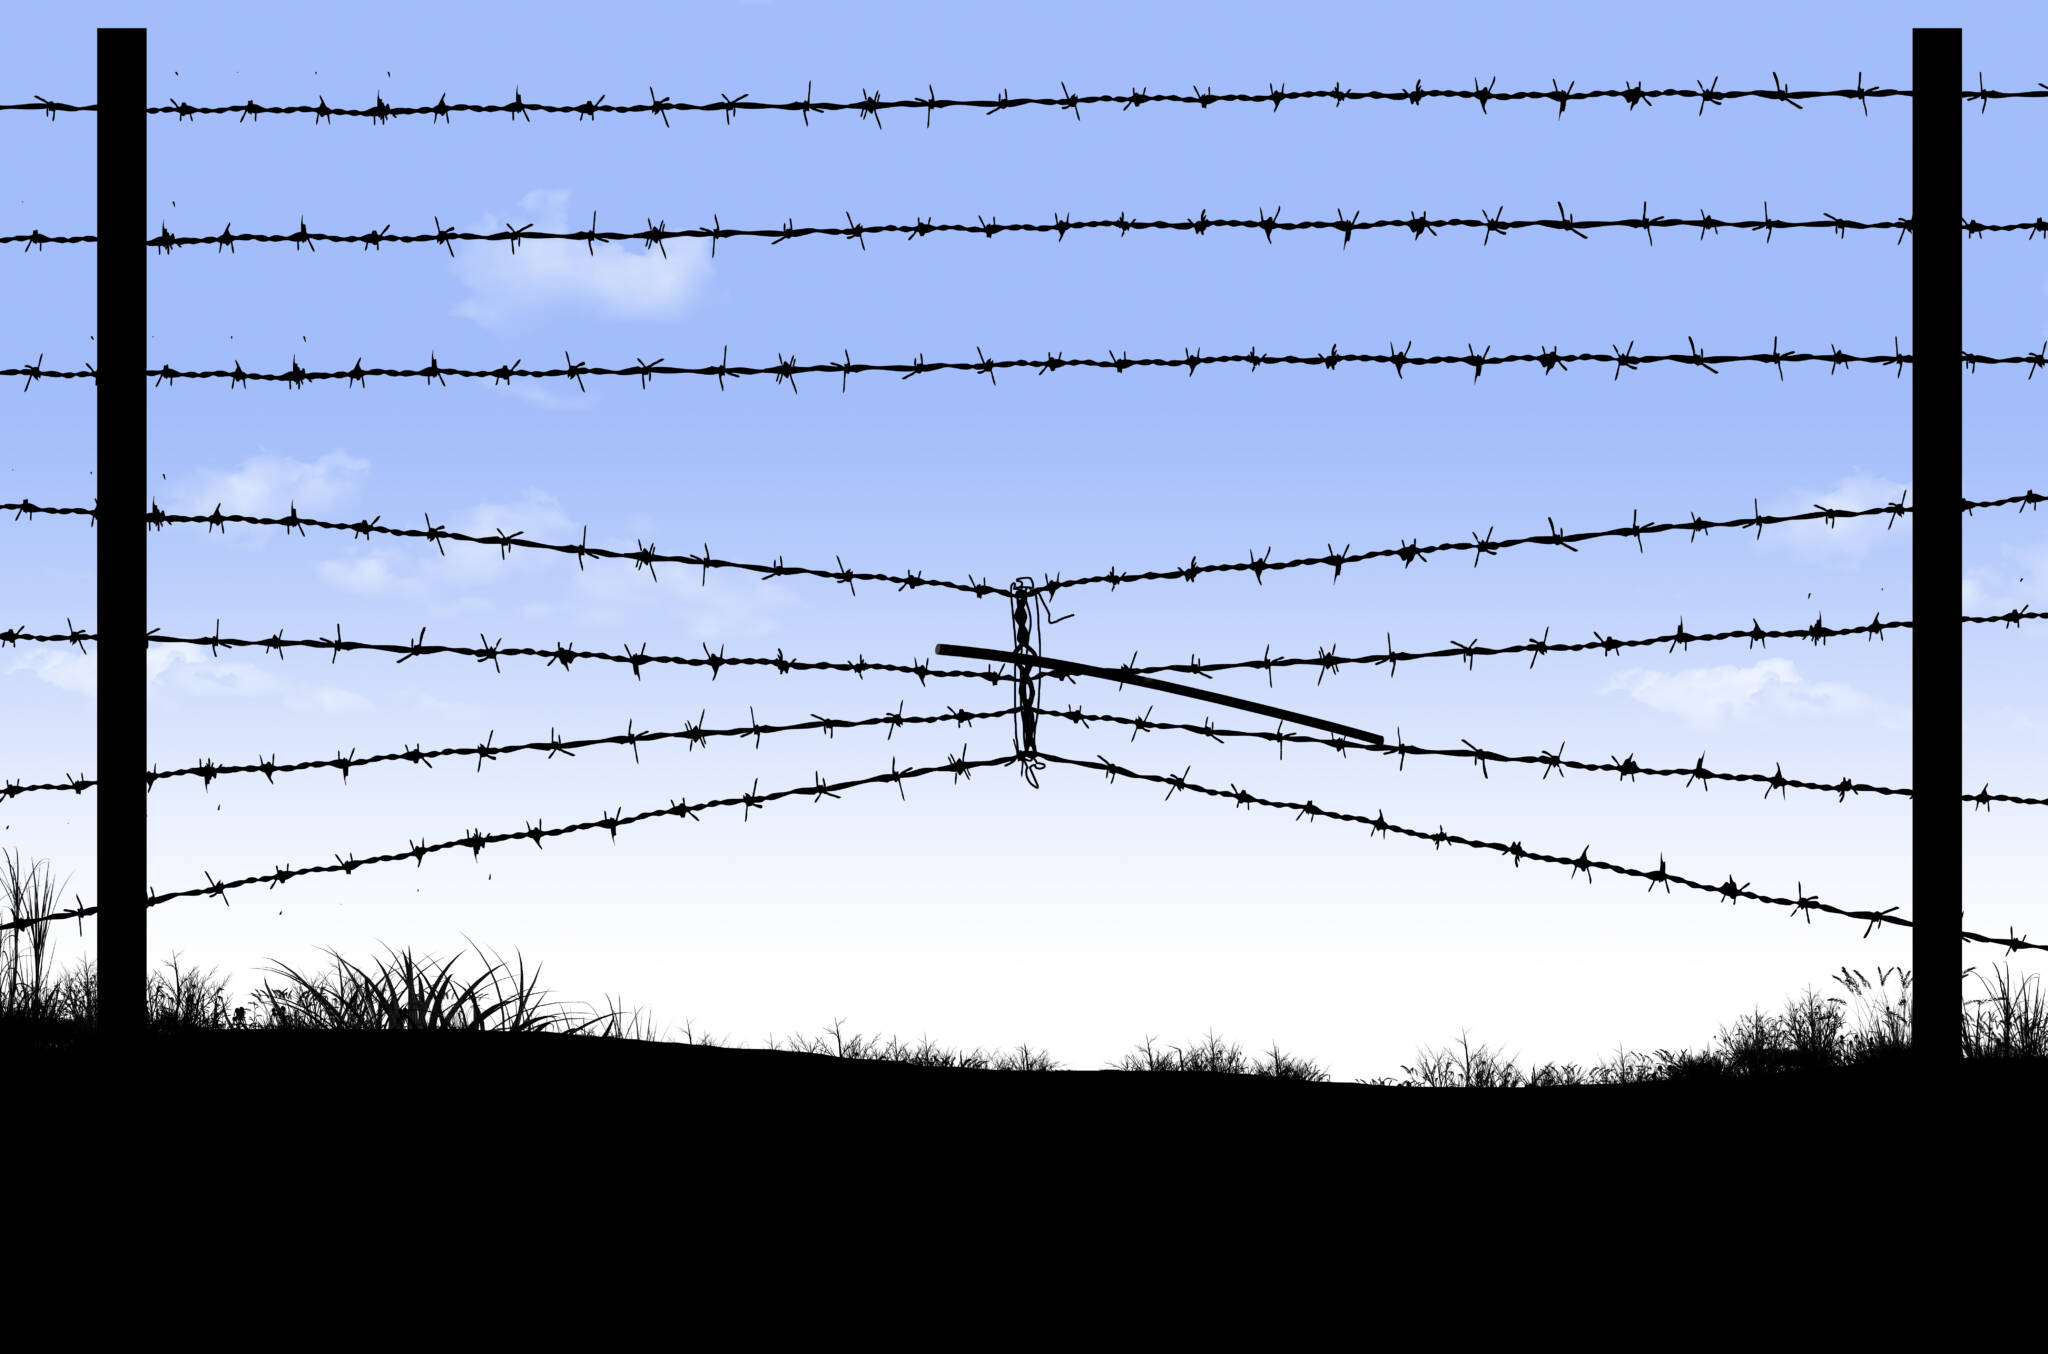 Here Is A Border Fence On The Southern Border Of The Usa That Has Barbed Wire Compressed To Make An Opening Underneath For An Opening To Cross Into The Usa Illegally. .